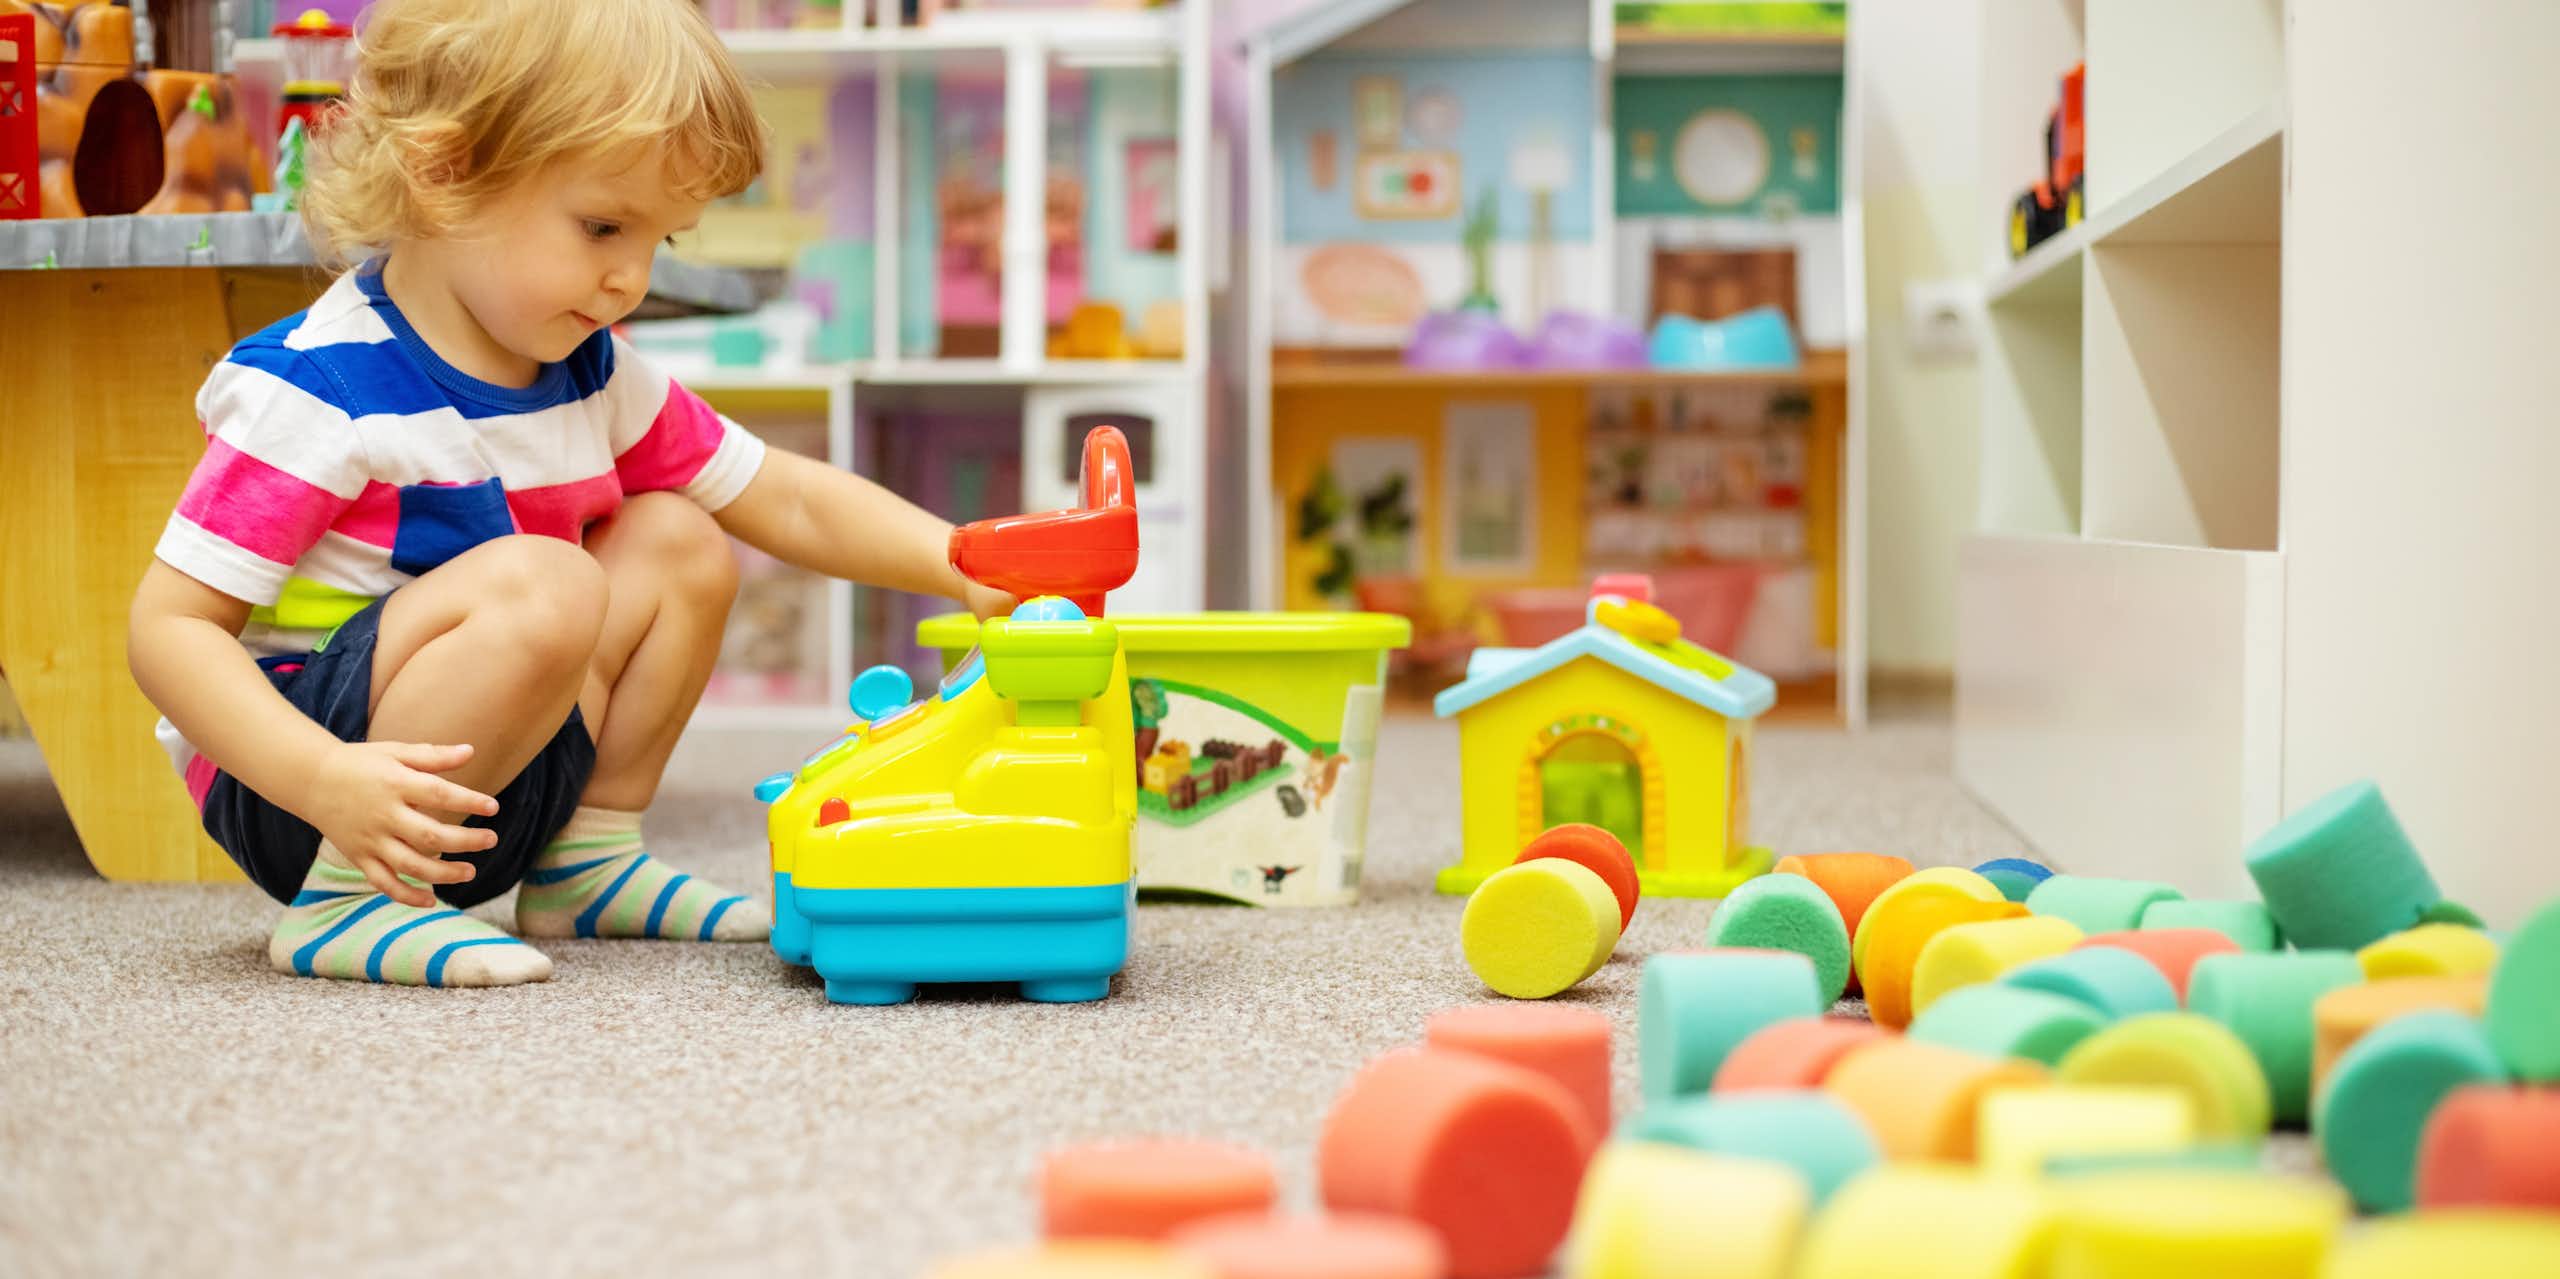 A child plays with soft toys in a nursery setting.